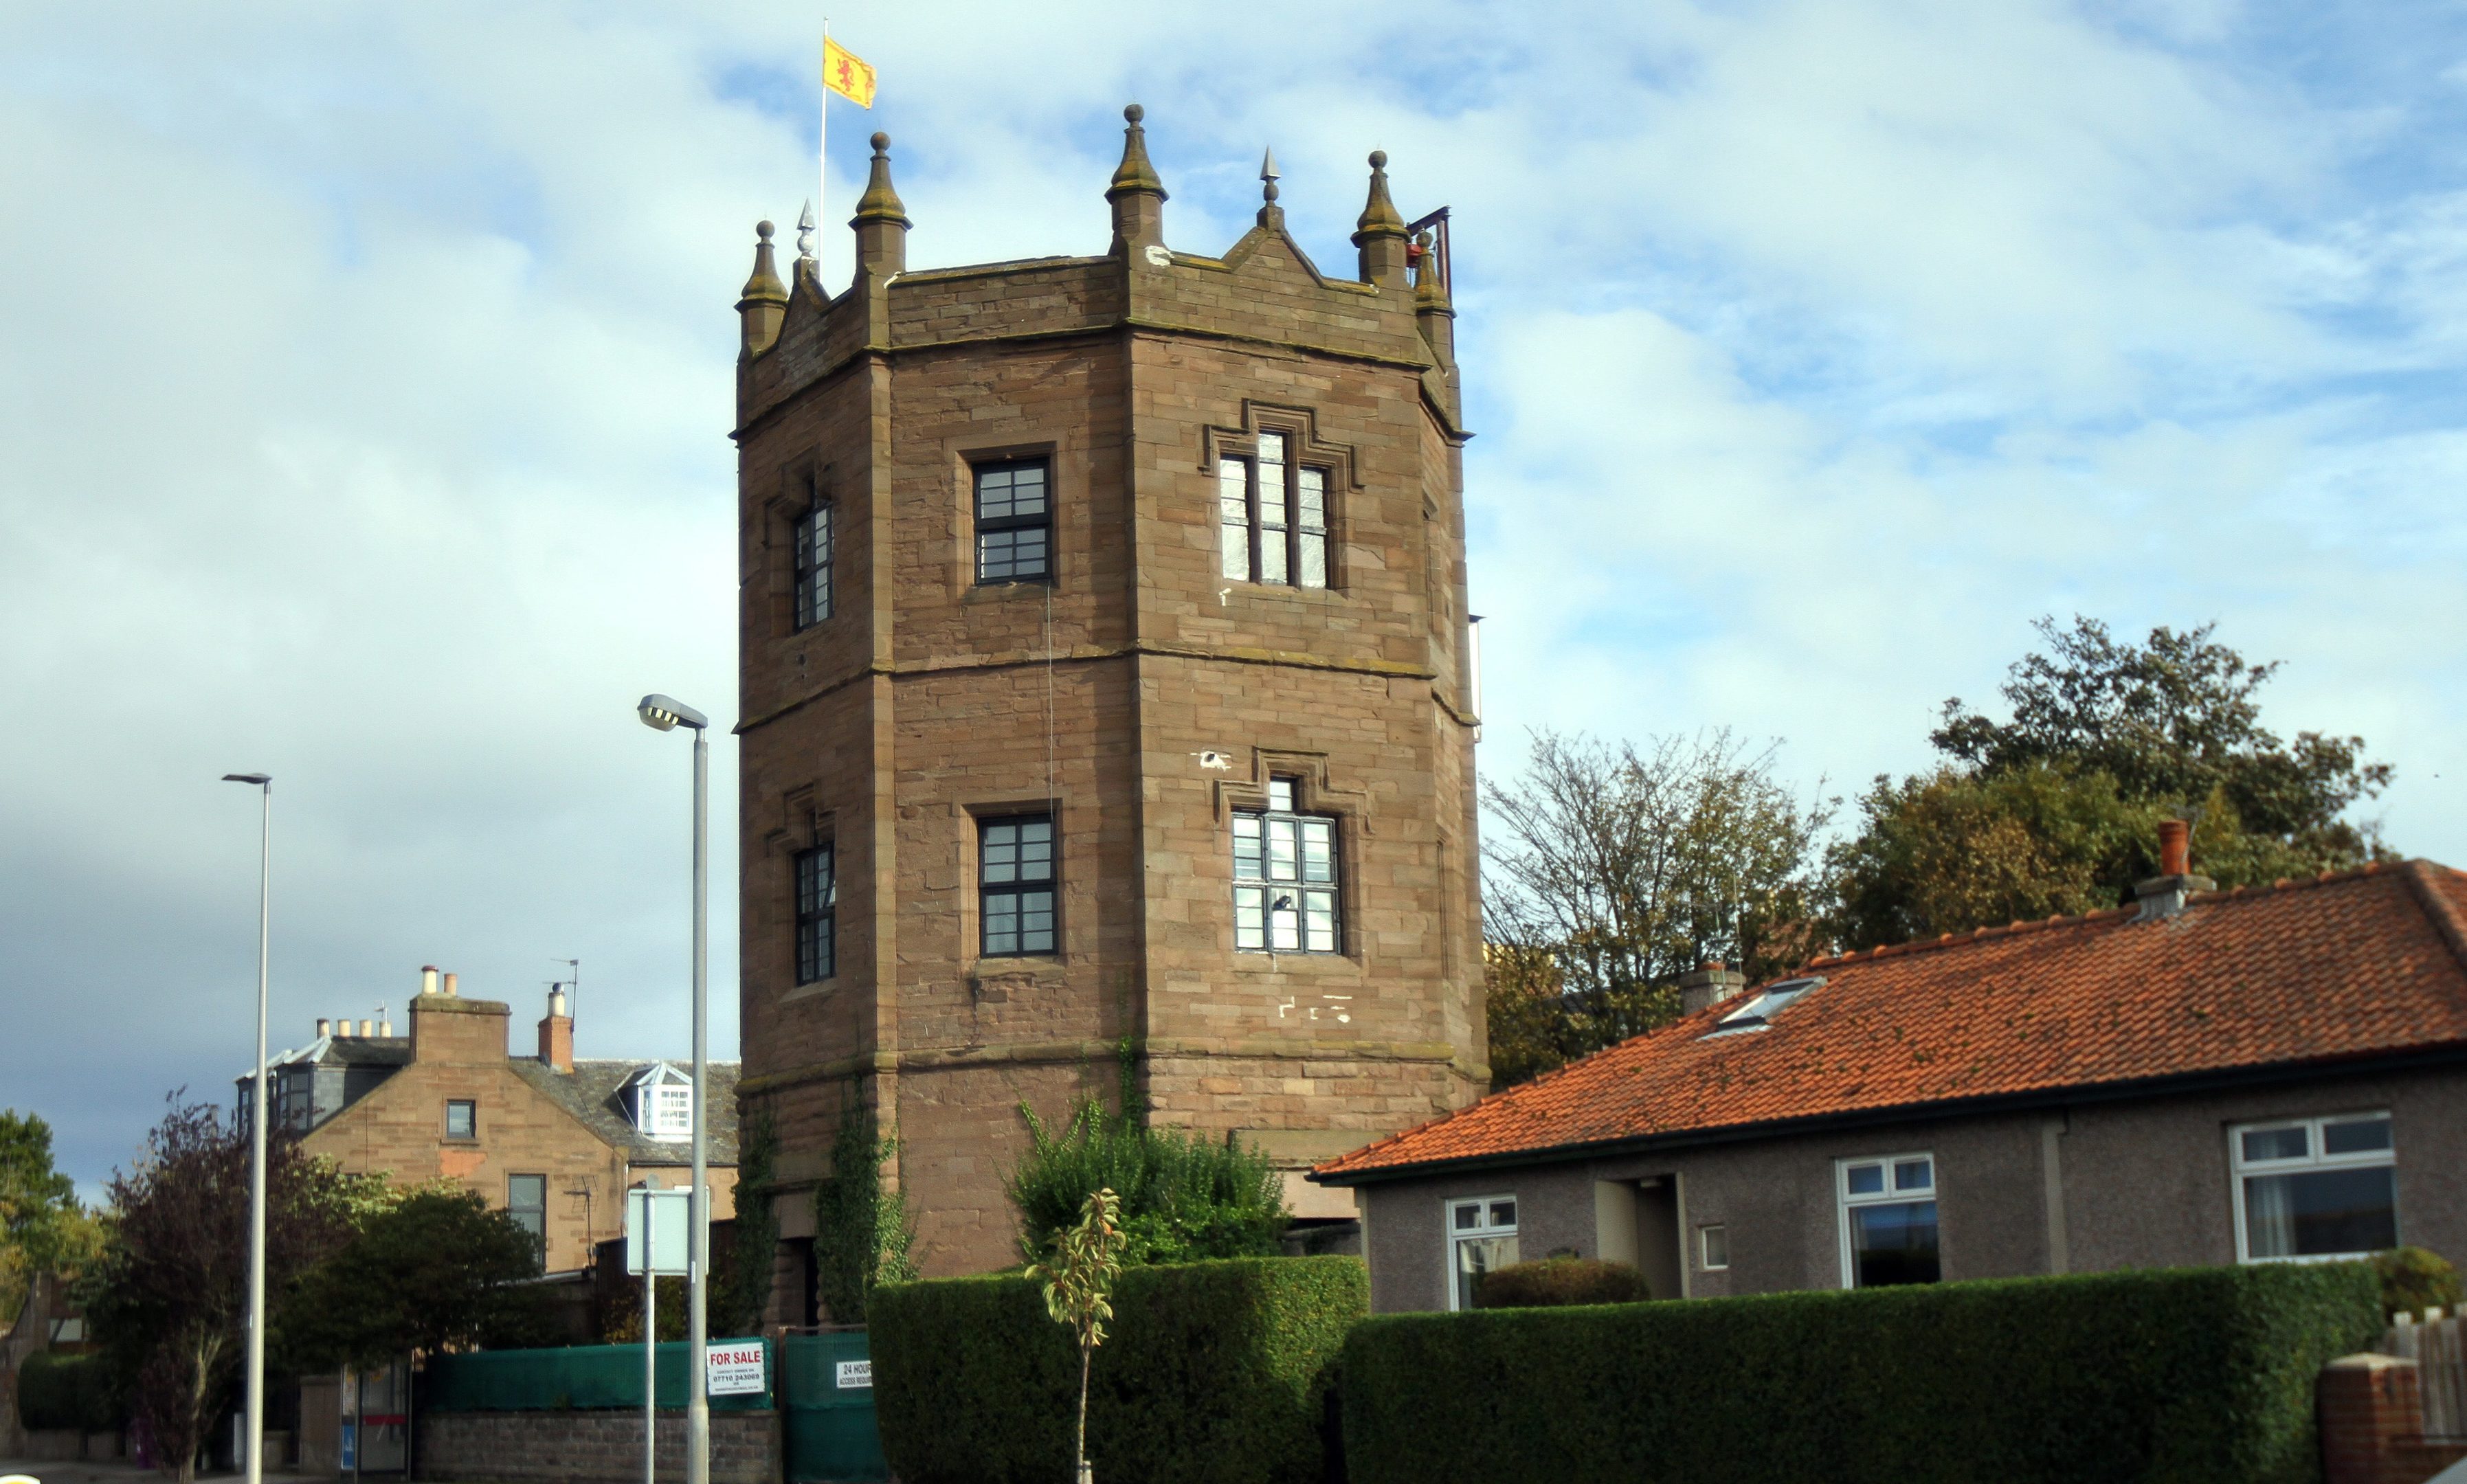 The Water Tower was built in 1841 and later converted into a place of residence.